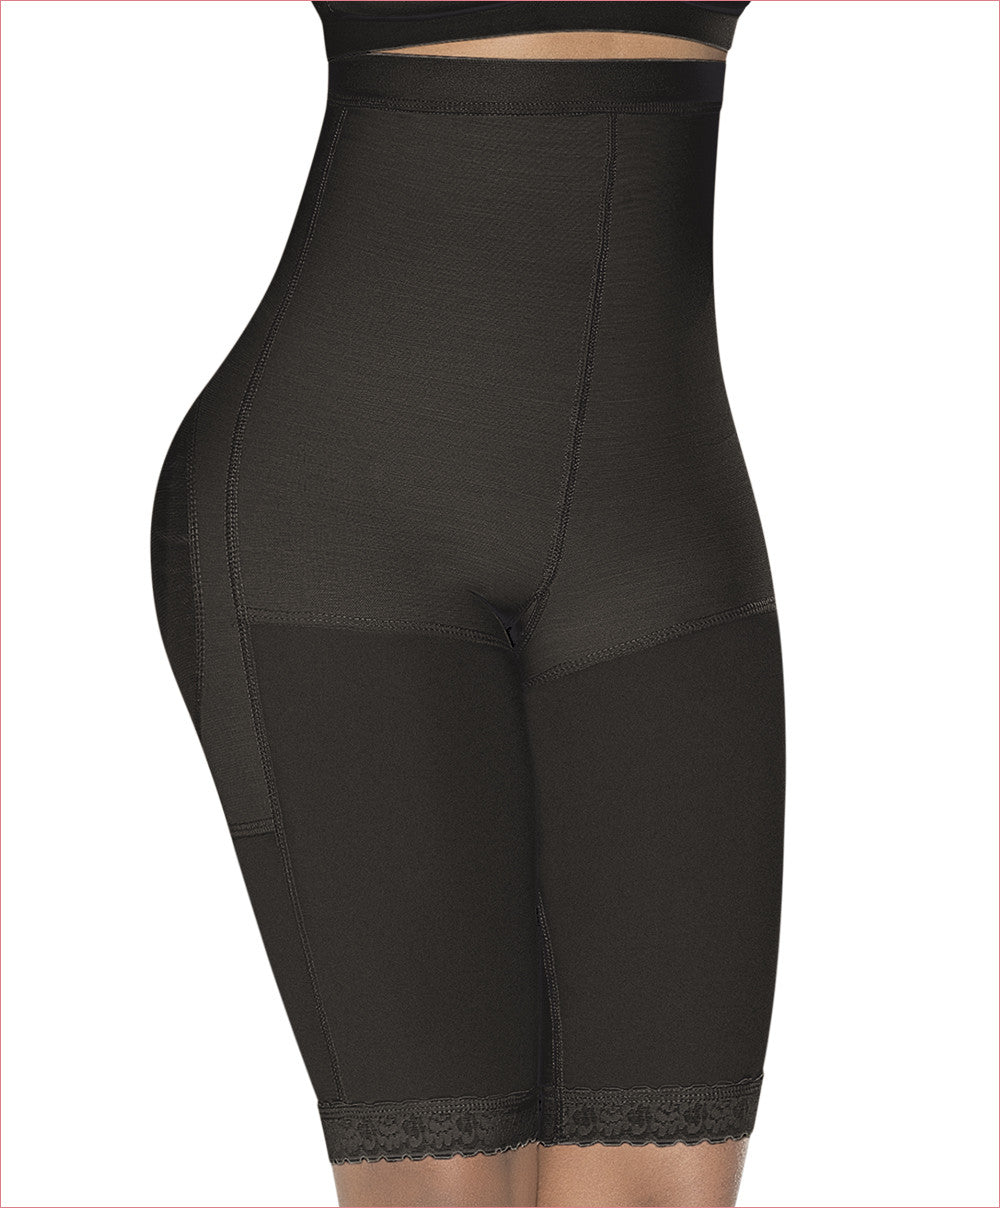 The Next Generation of Shapewear is now available at your nearest Belk